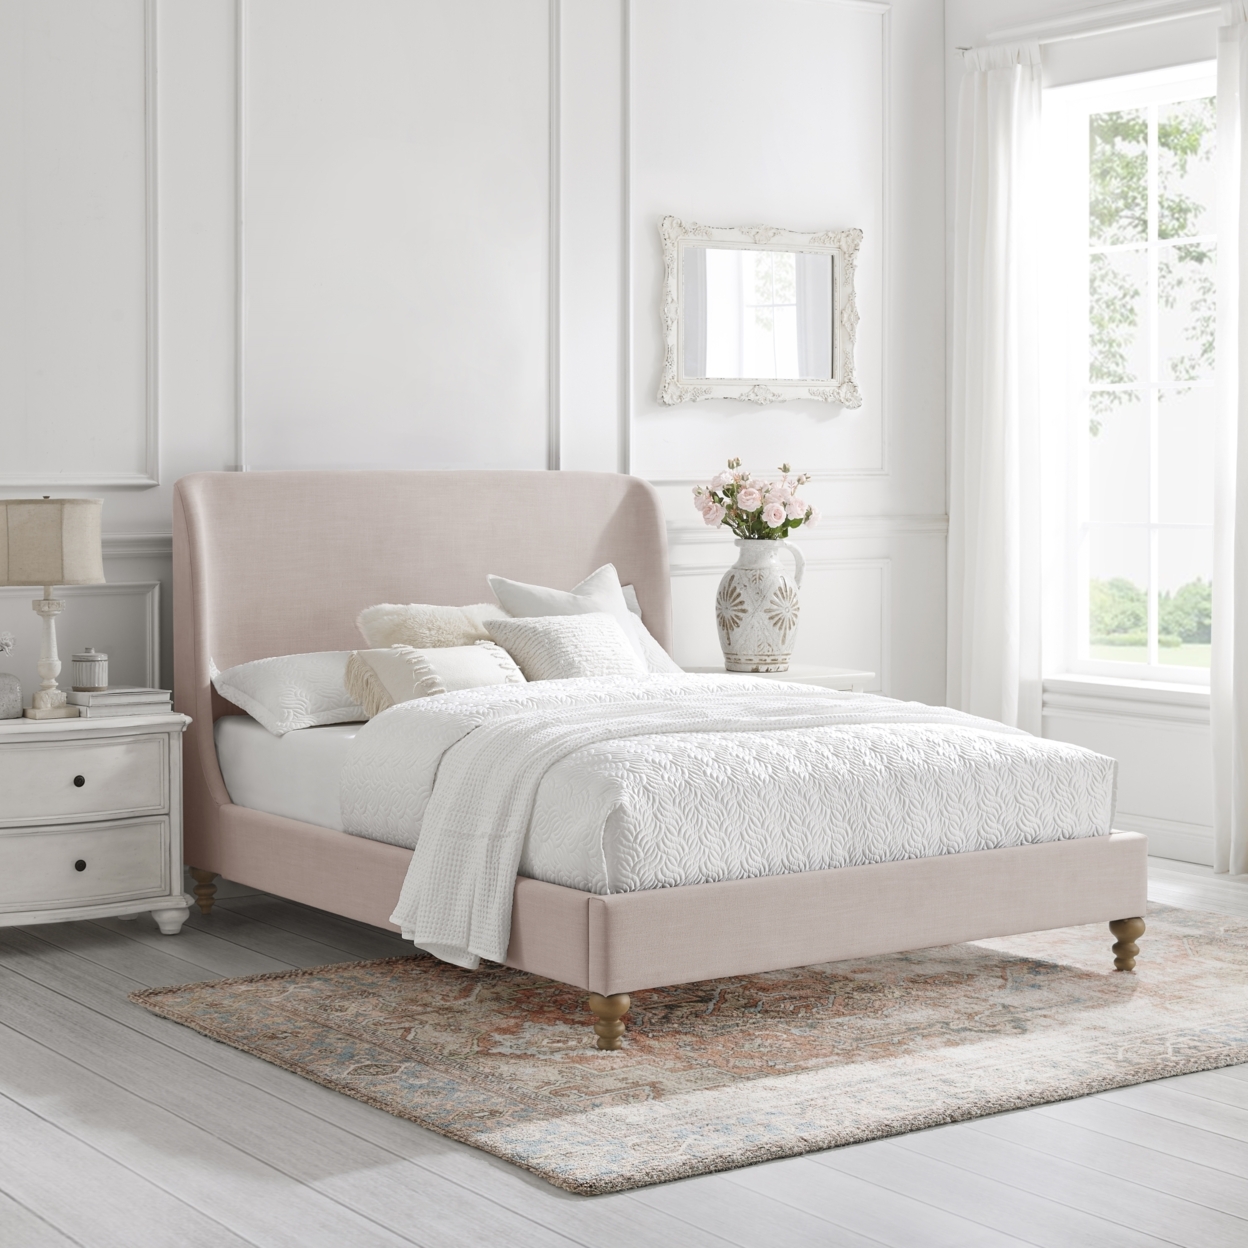 Rosalyn Bed-Wingback-Upholstered-Slats Included - Cream White, Twin